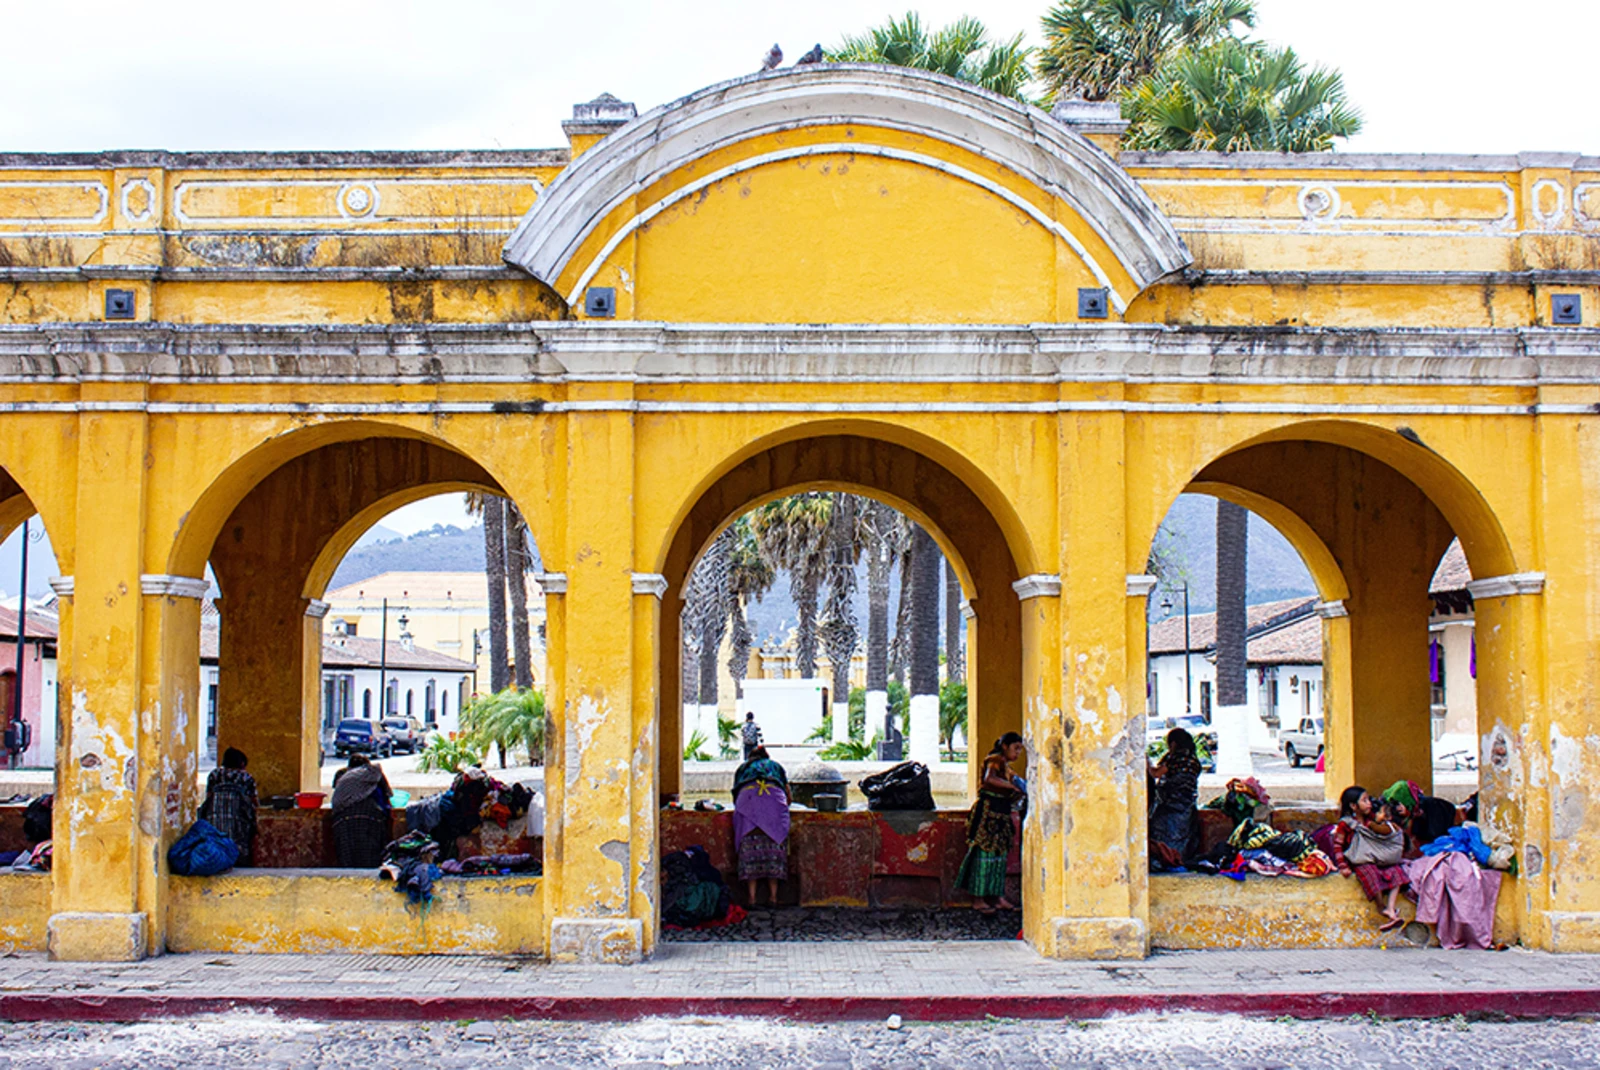 yellow and white building in Guatemala with people sitting on arches and green palm trees in background